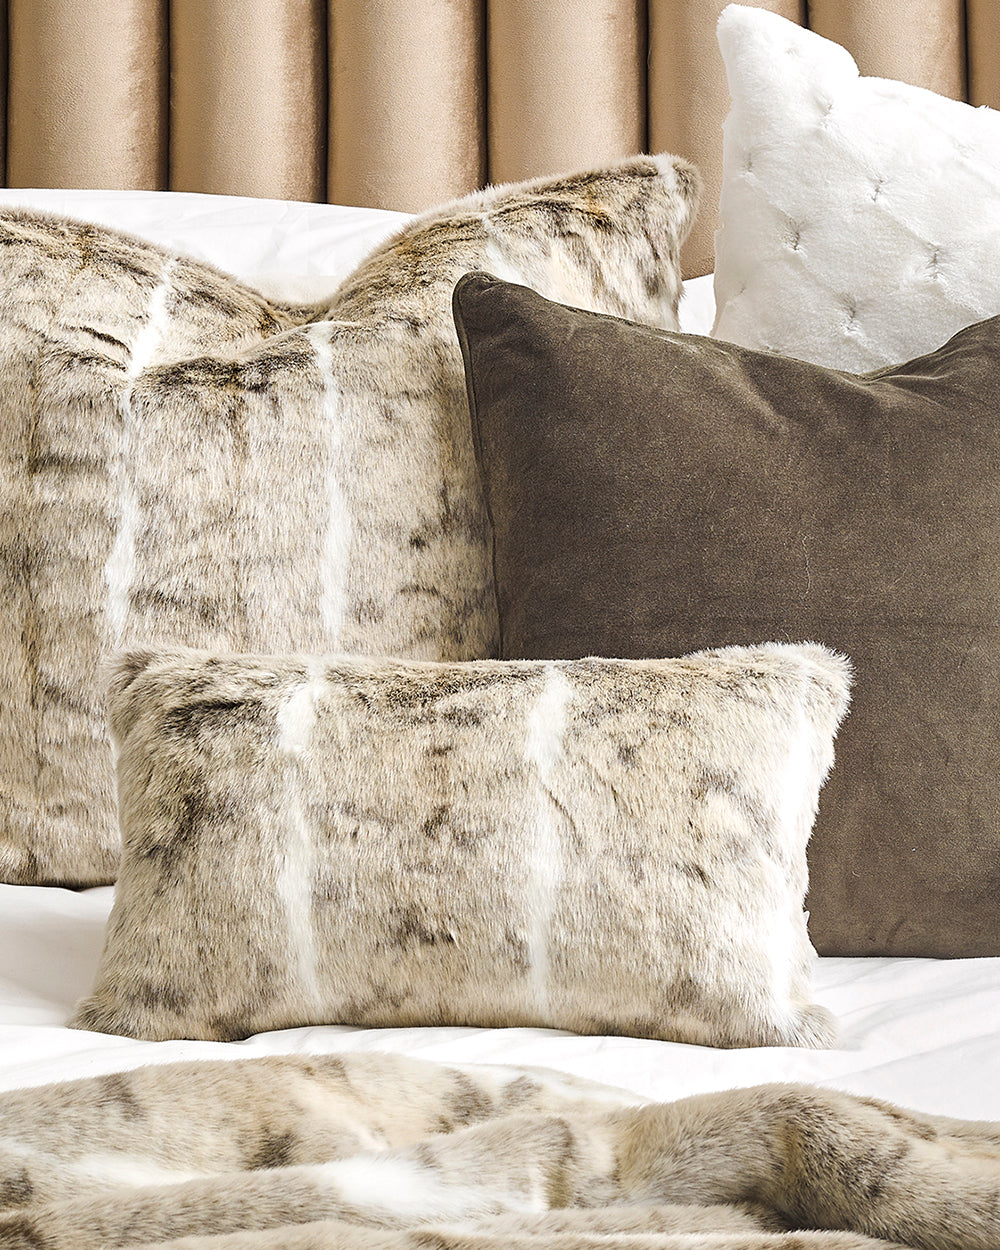 Heirloom Mountain Rabbit Cushions in Faux Fur are available from Make Your House A Home Premium Stockist. Furniture Store Bendigo, Victoria. Australia Wide Delivery. Furtex Baya.